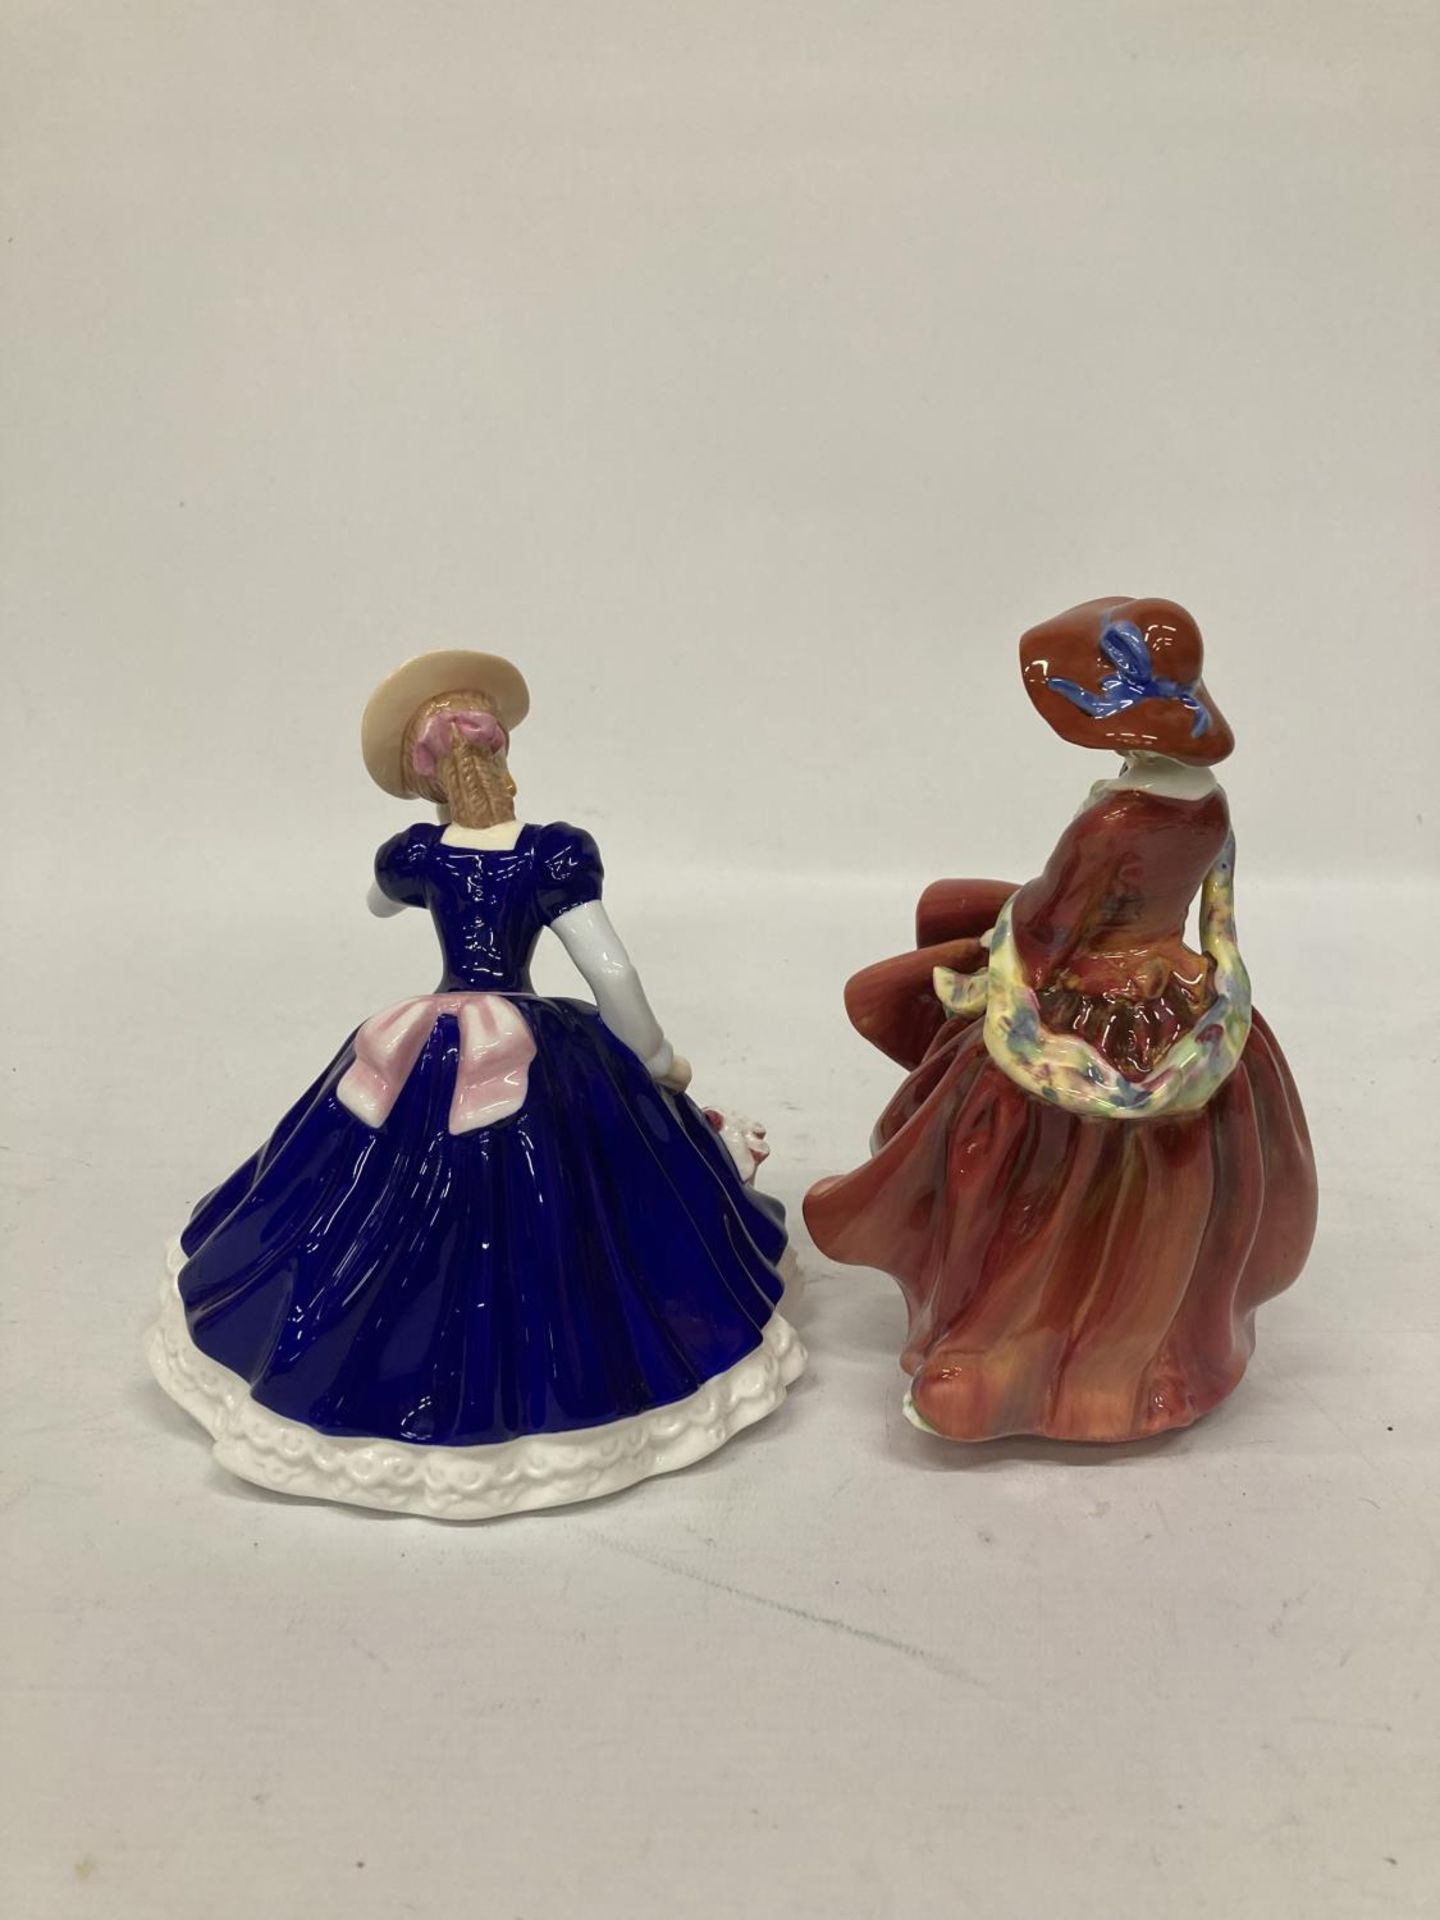 TWO ROYAL DOULTON FIGURINES ONE FROM THE PRETTY LADIES COLLECTION "FIGURE OF THE YEAR 2007 MARY" AND - Image 3 of 4